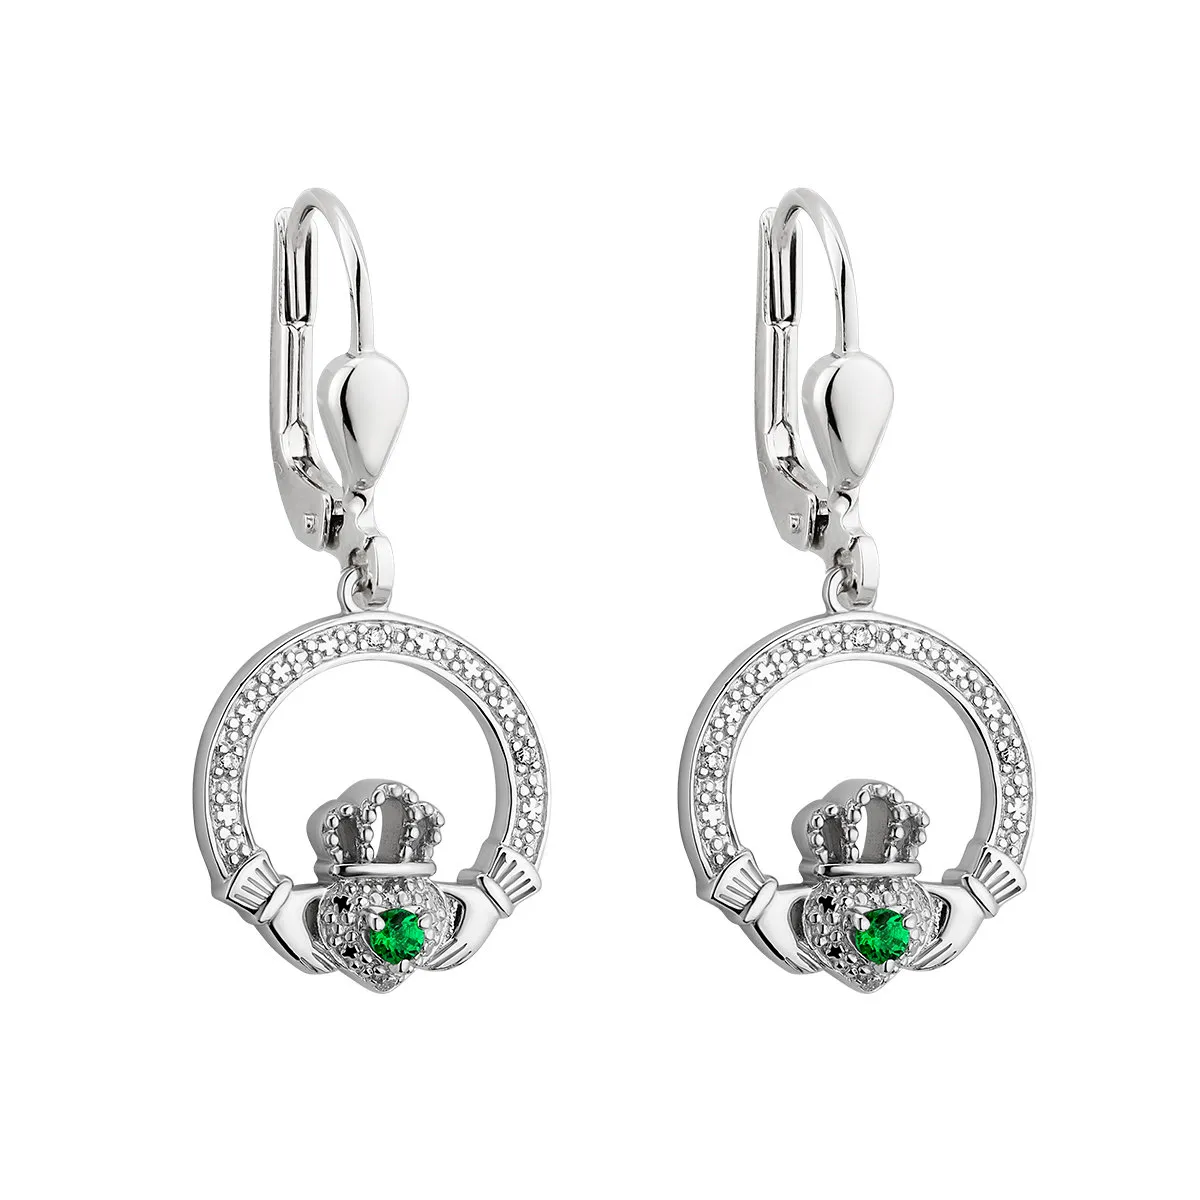 Green Crystal and Cubic Zirconia Claddagh Drop Earrings in Sterling Si...